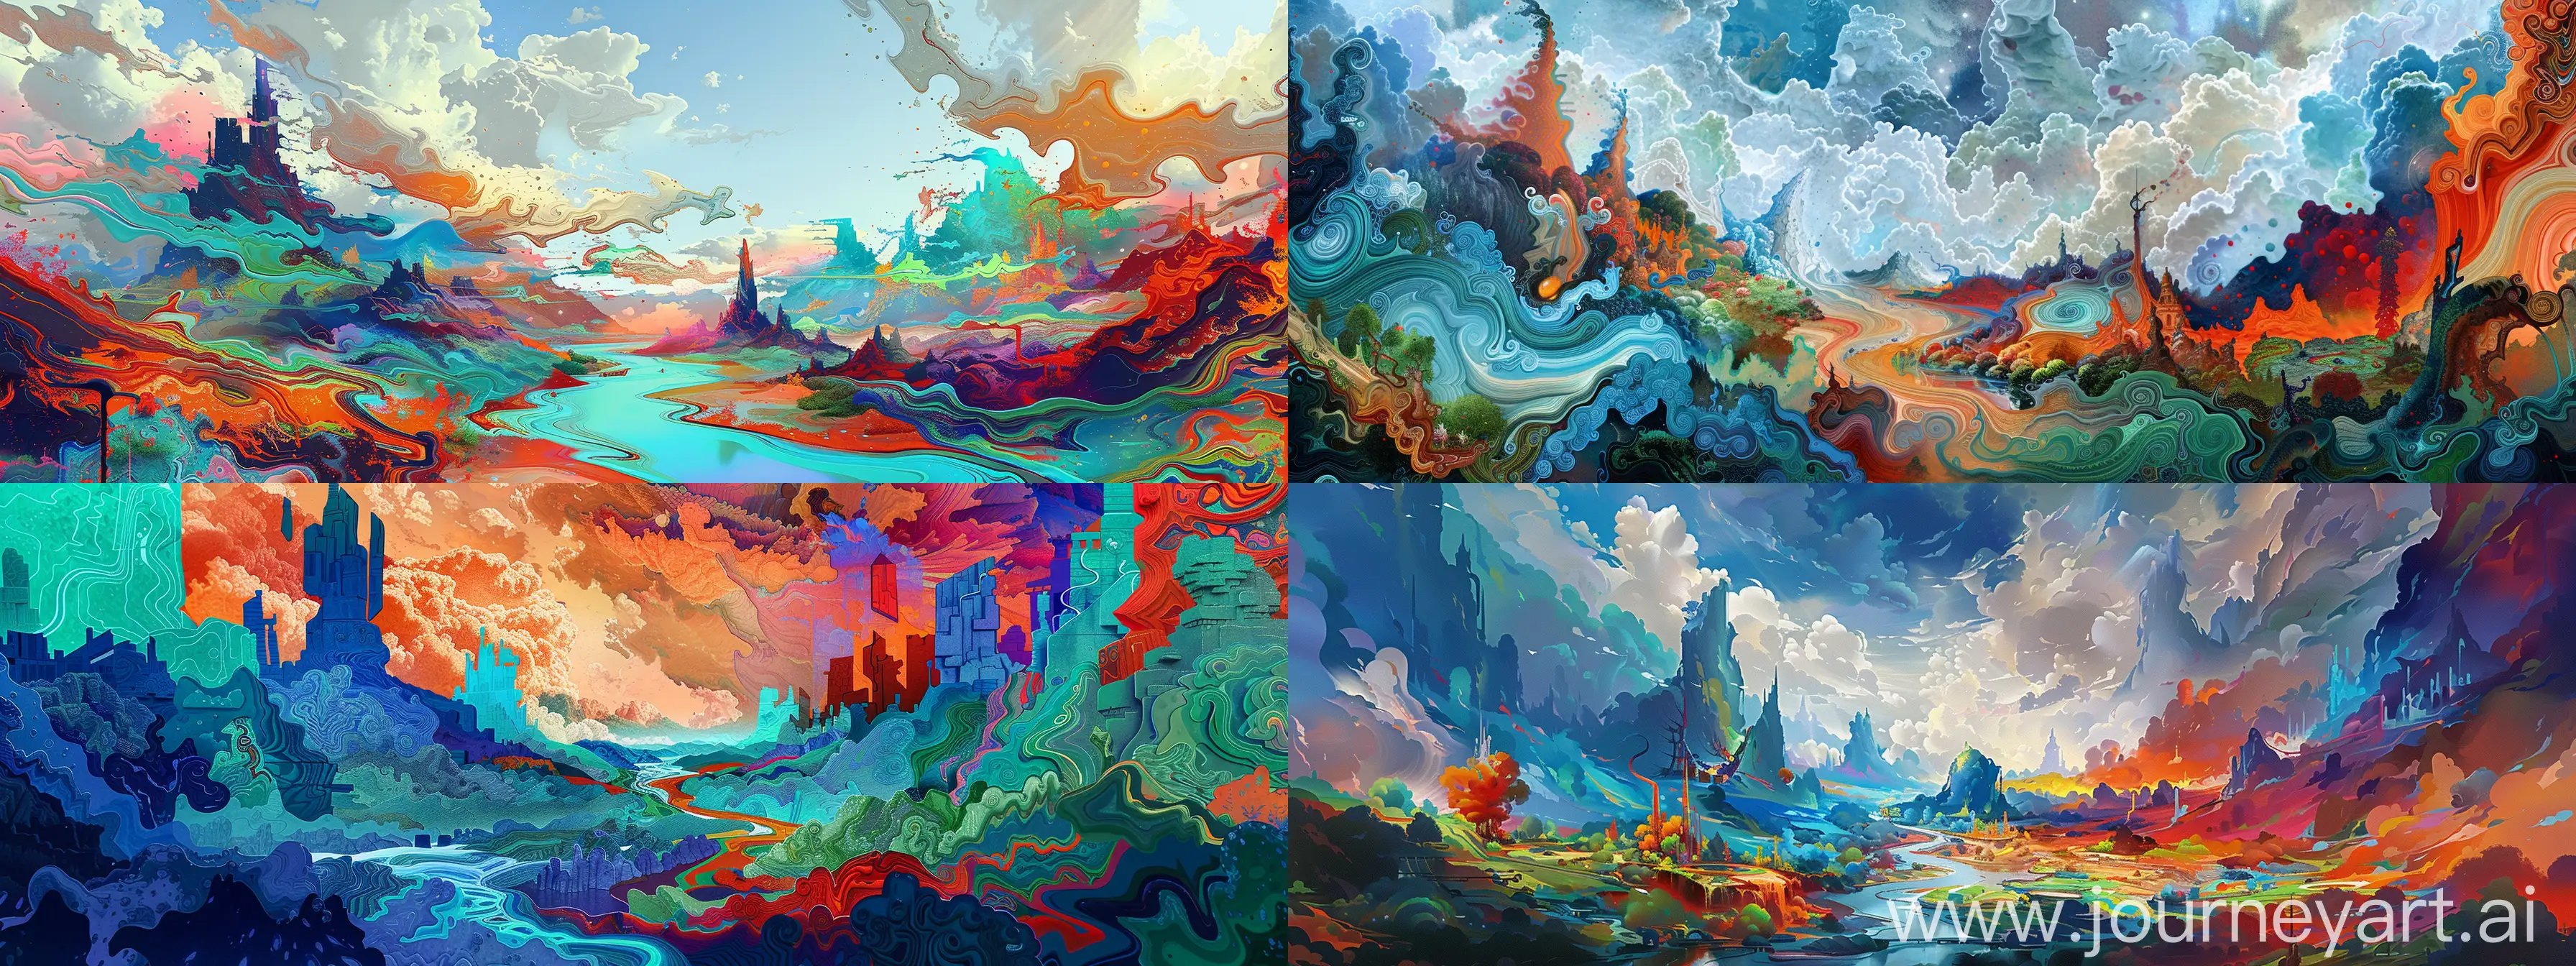 Fantastical-Landscape-with-Vibrant-Colors-and-Abstract-Structures